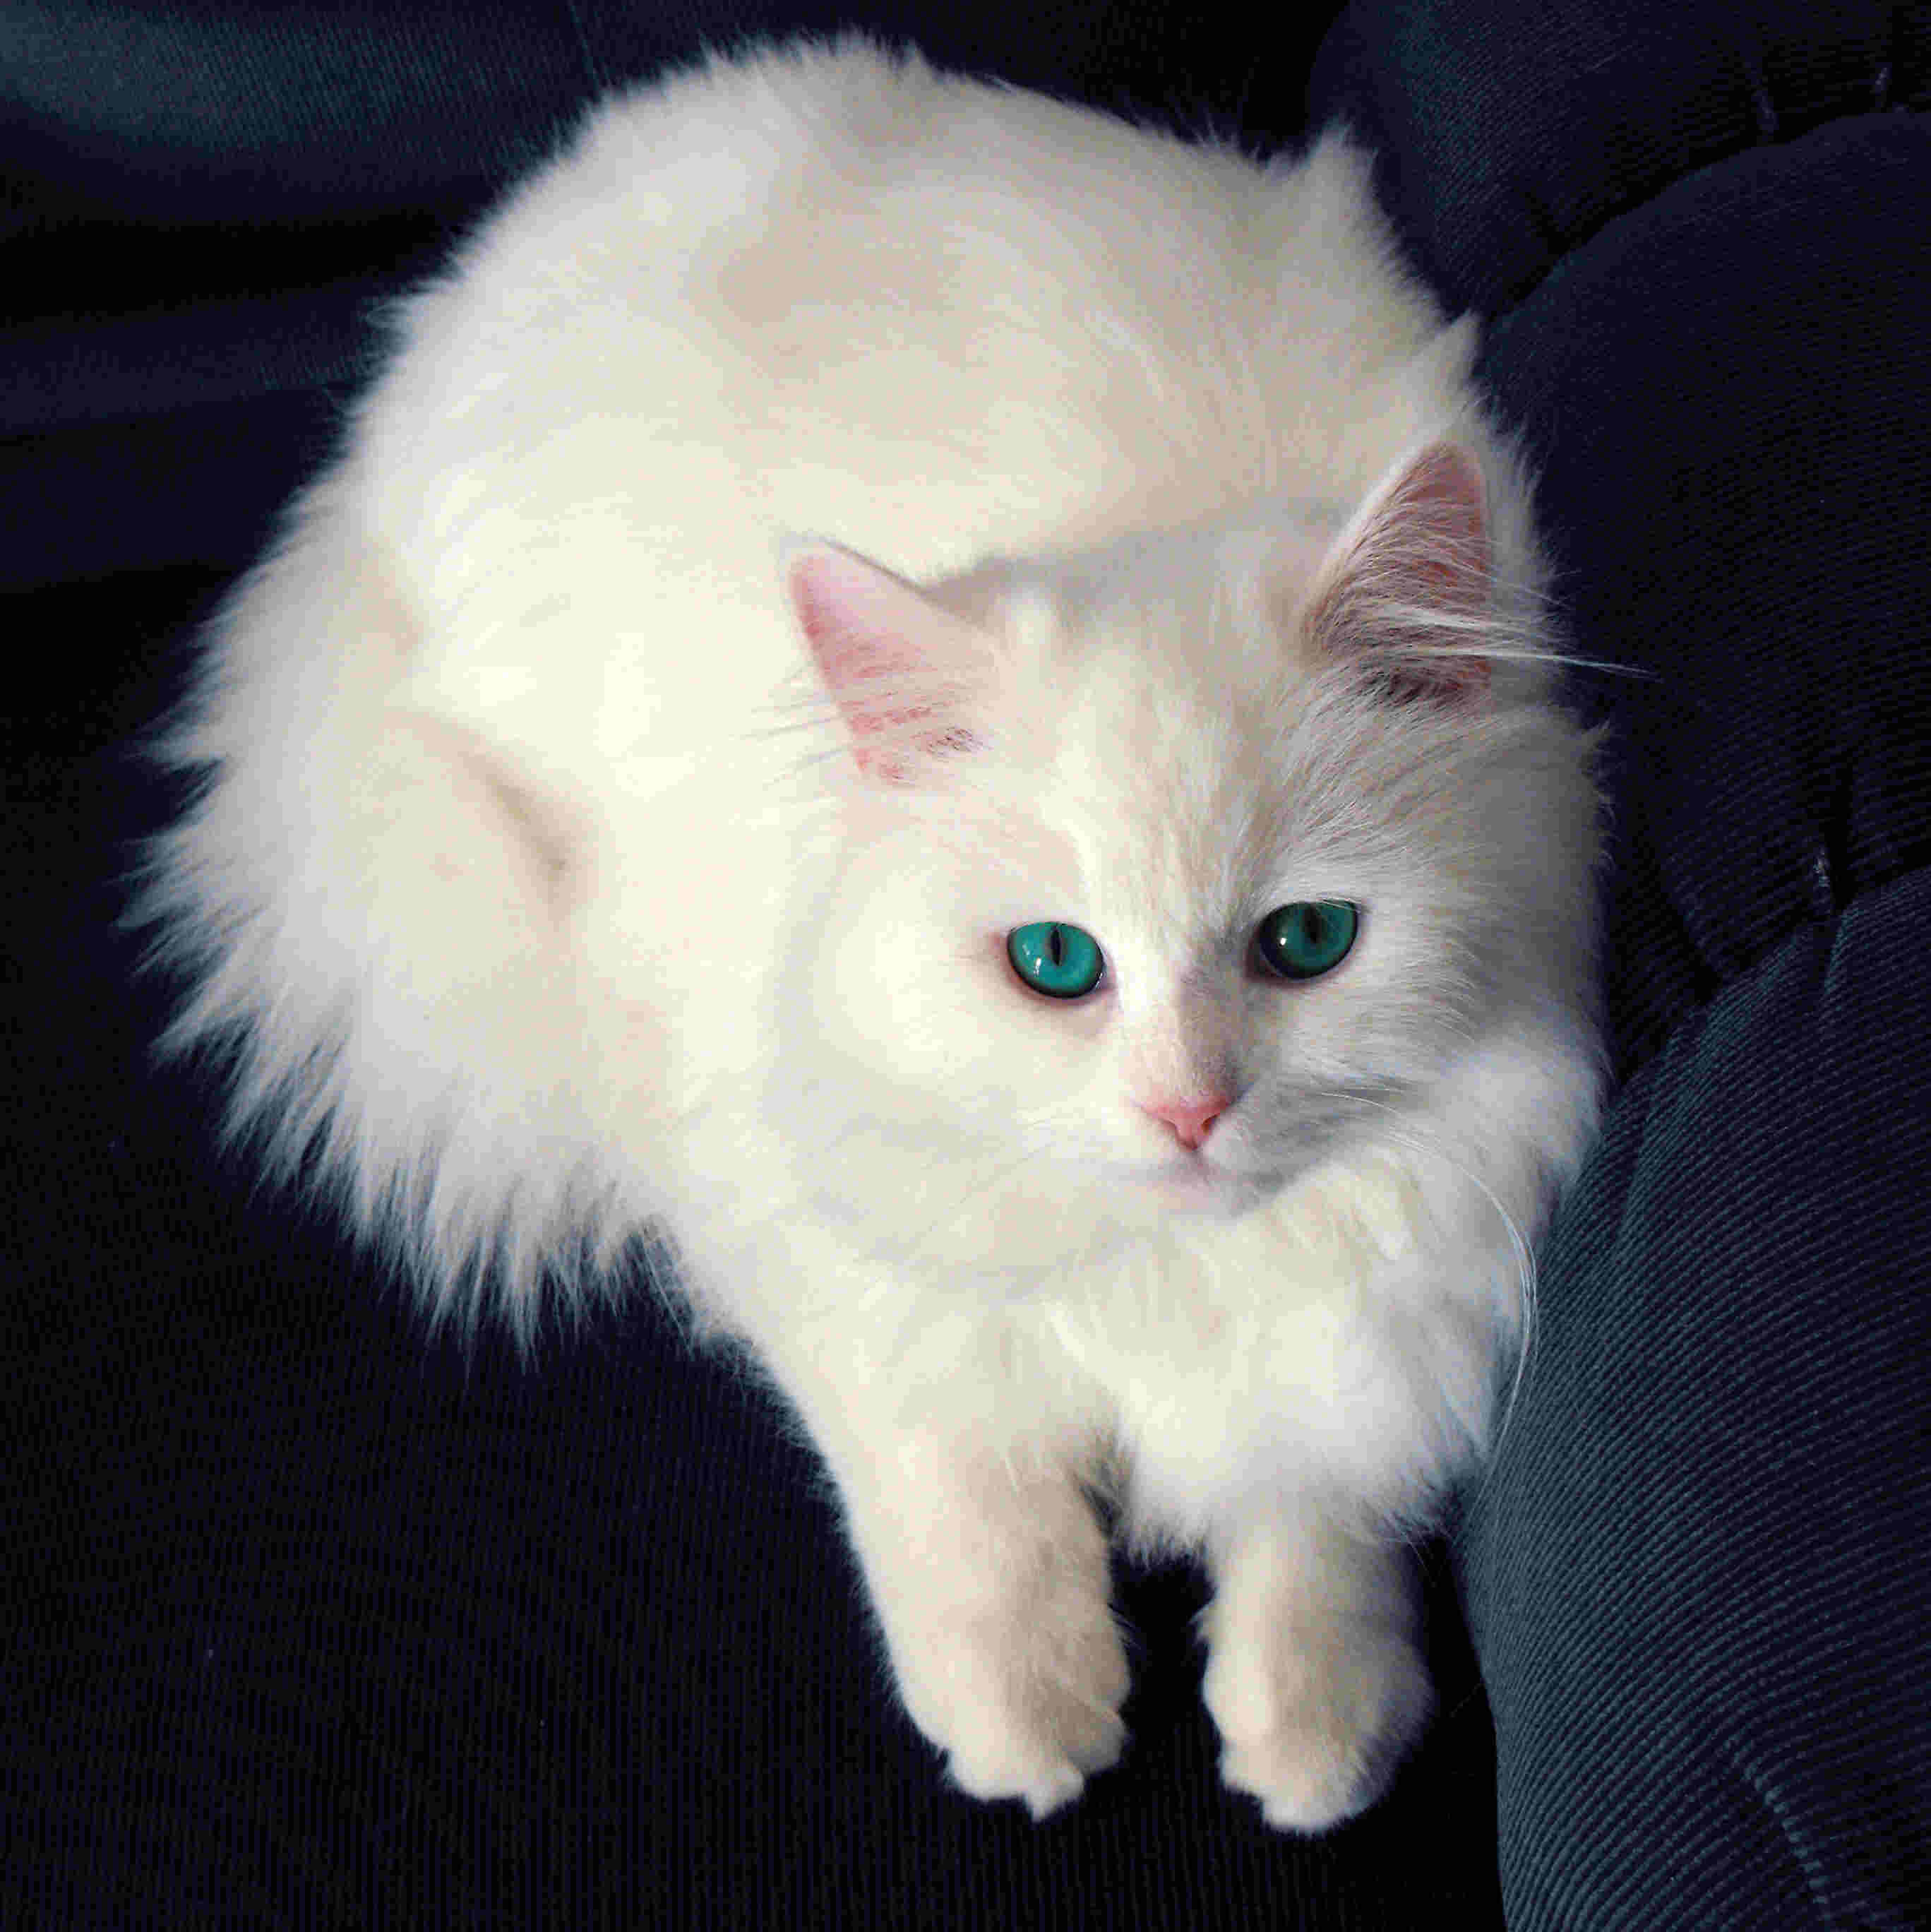  White  Cat  Wallpapers  Wallpaper  Cave